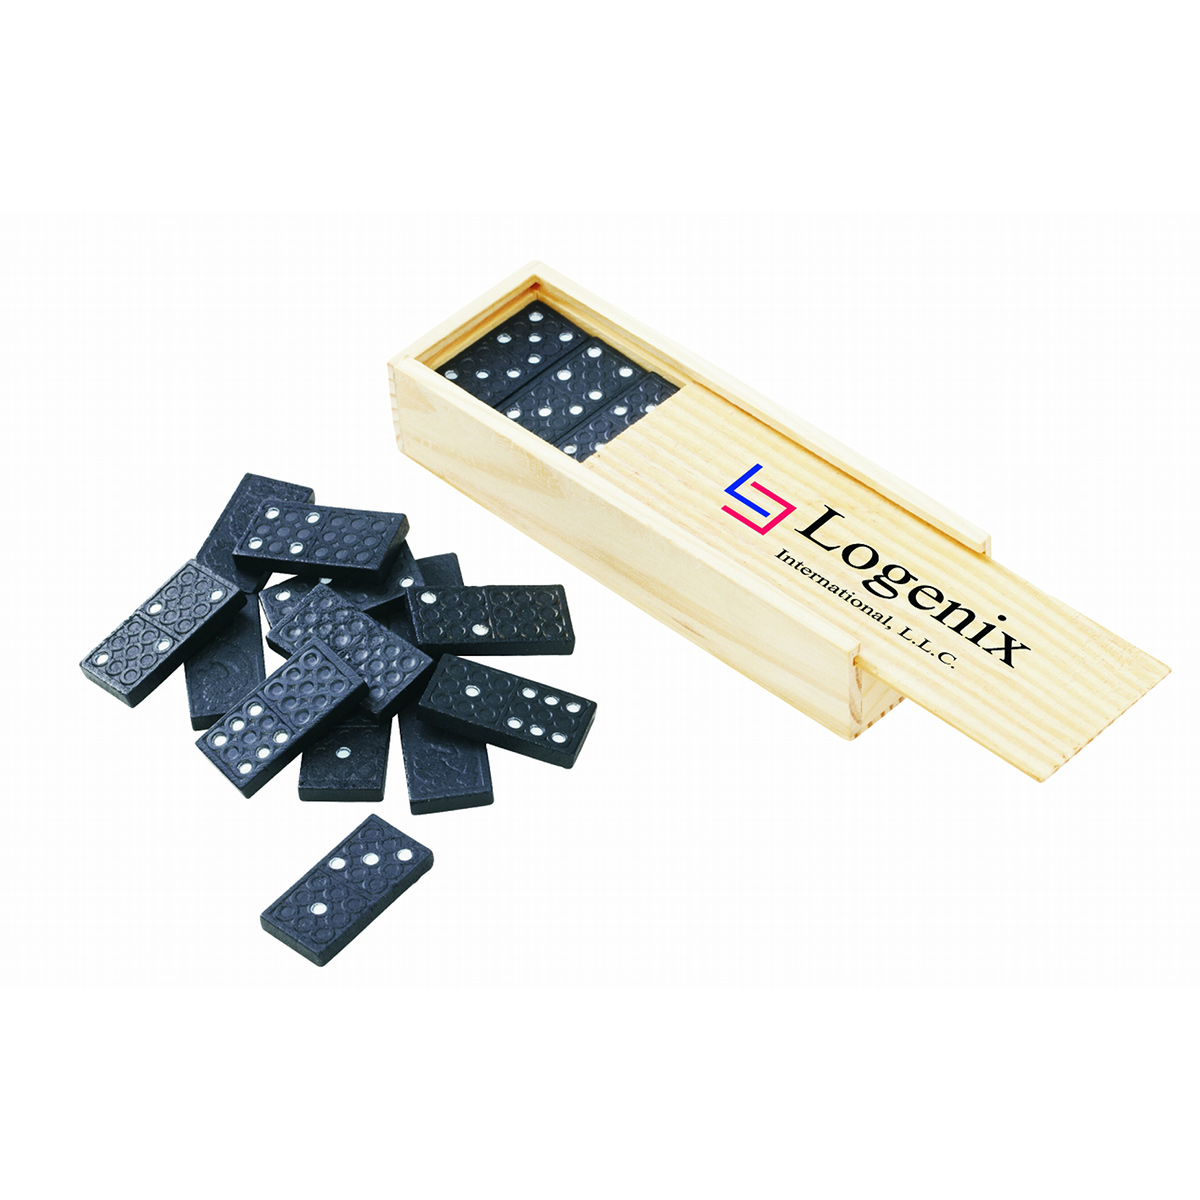 Promotional Travel Domino Set in Wooden Box